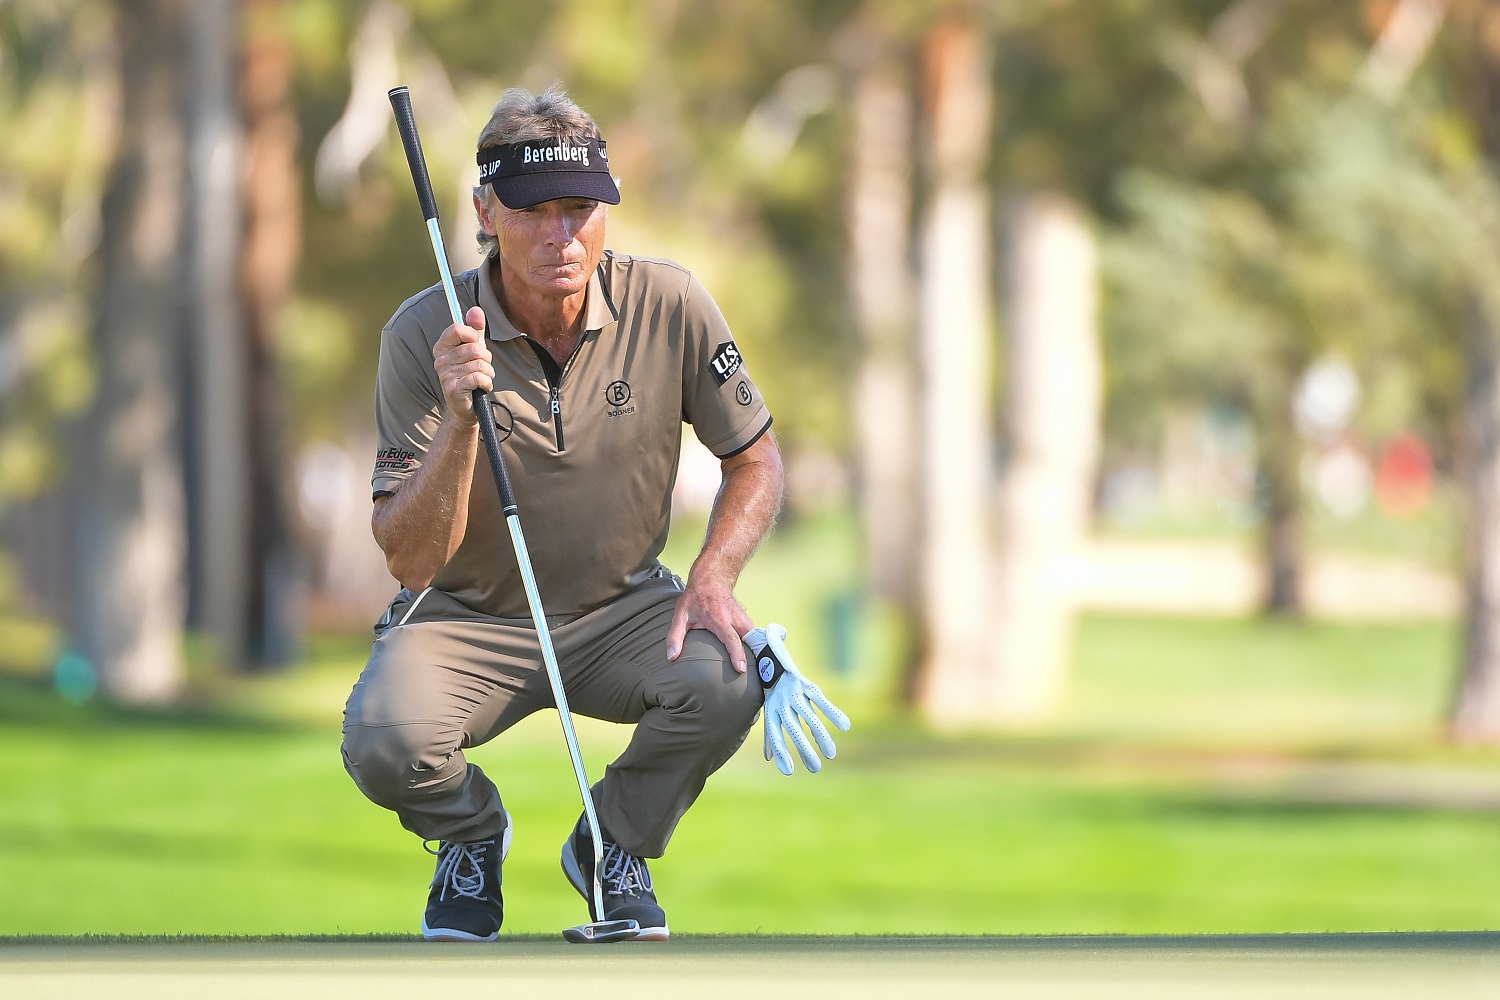 Bernhard Langer reads the ninth green during the second round of the PGA Tour Champions Charles Schwab Cup Championship at Phoenix Country Club on Nov. 12, 2021.